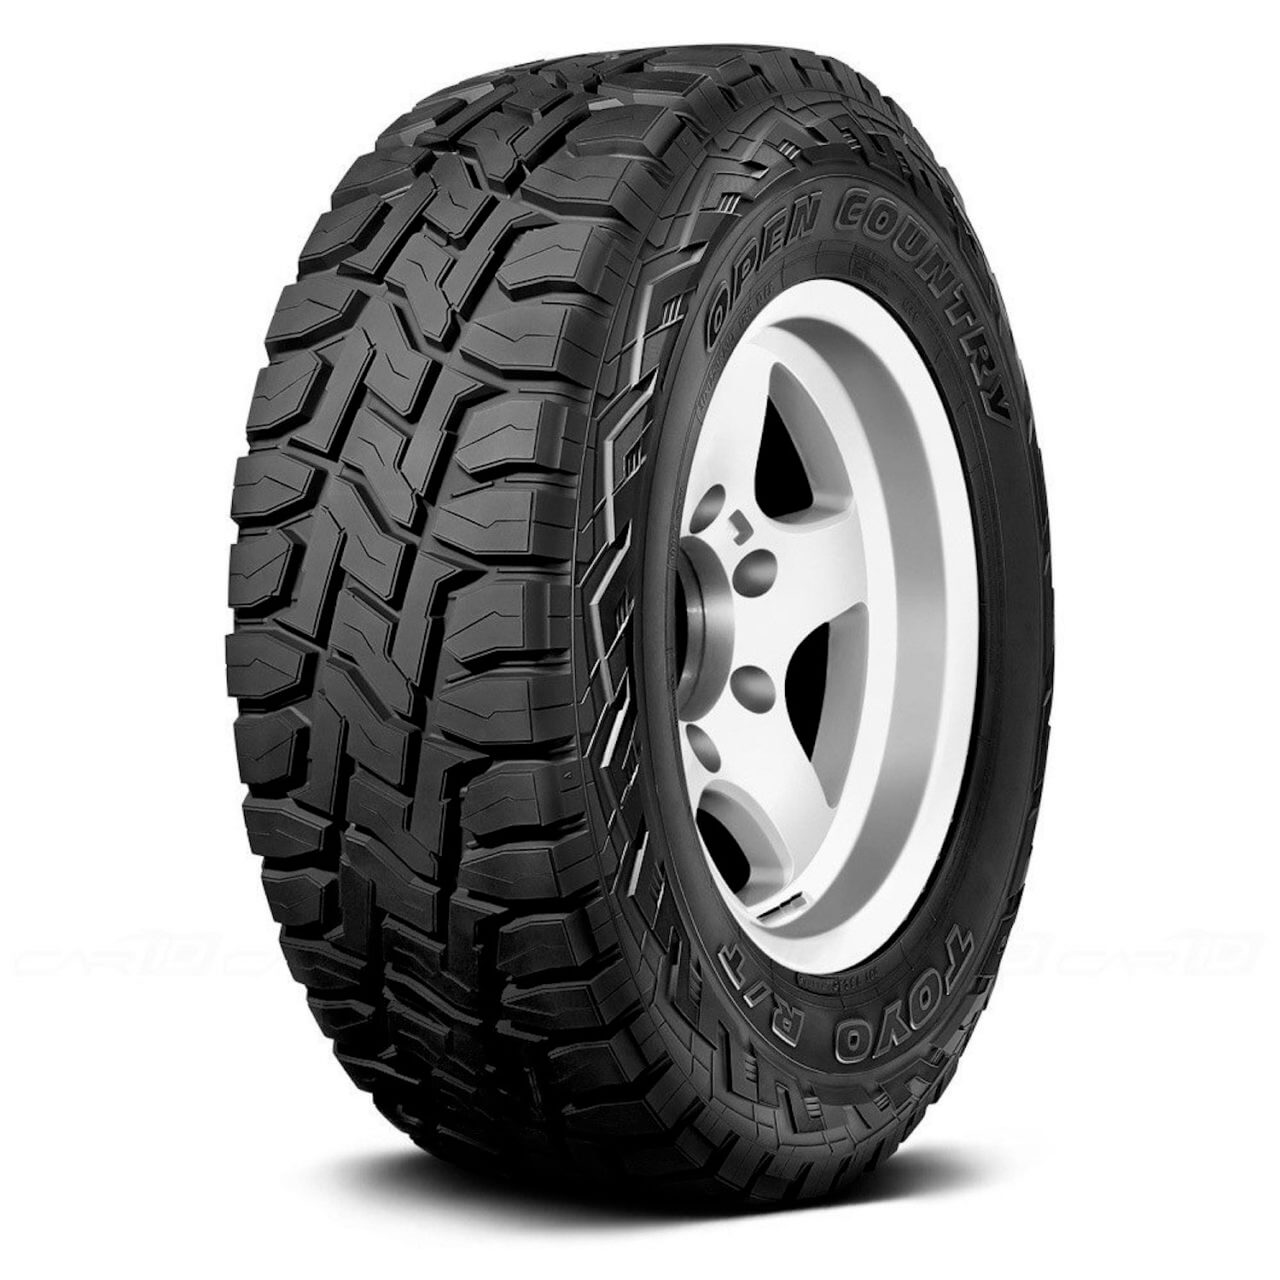 05 Toyo Open Country RT Rugged Terrain Tire